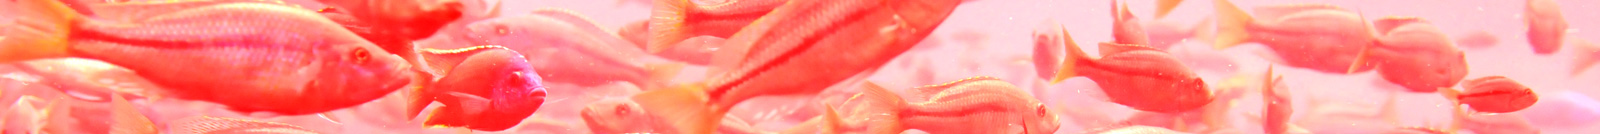 banner_acuicola